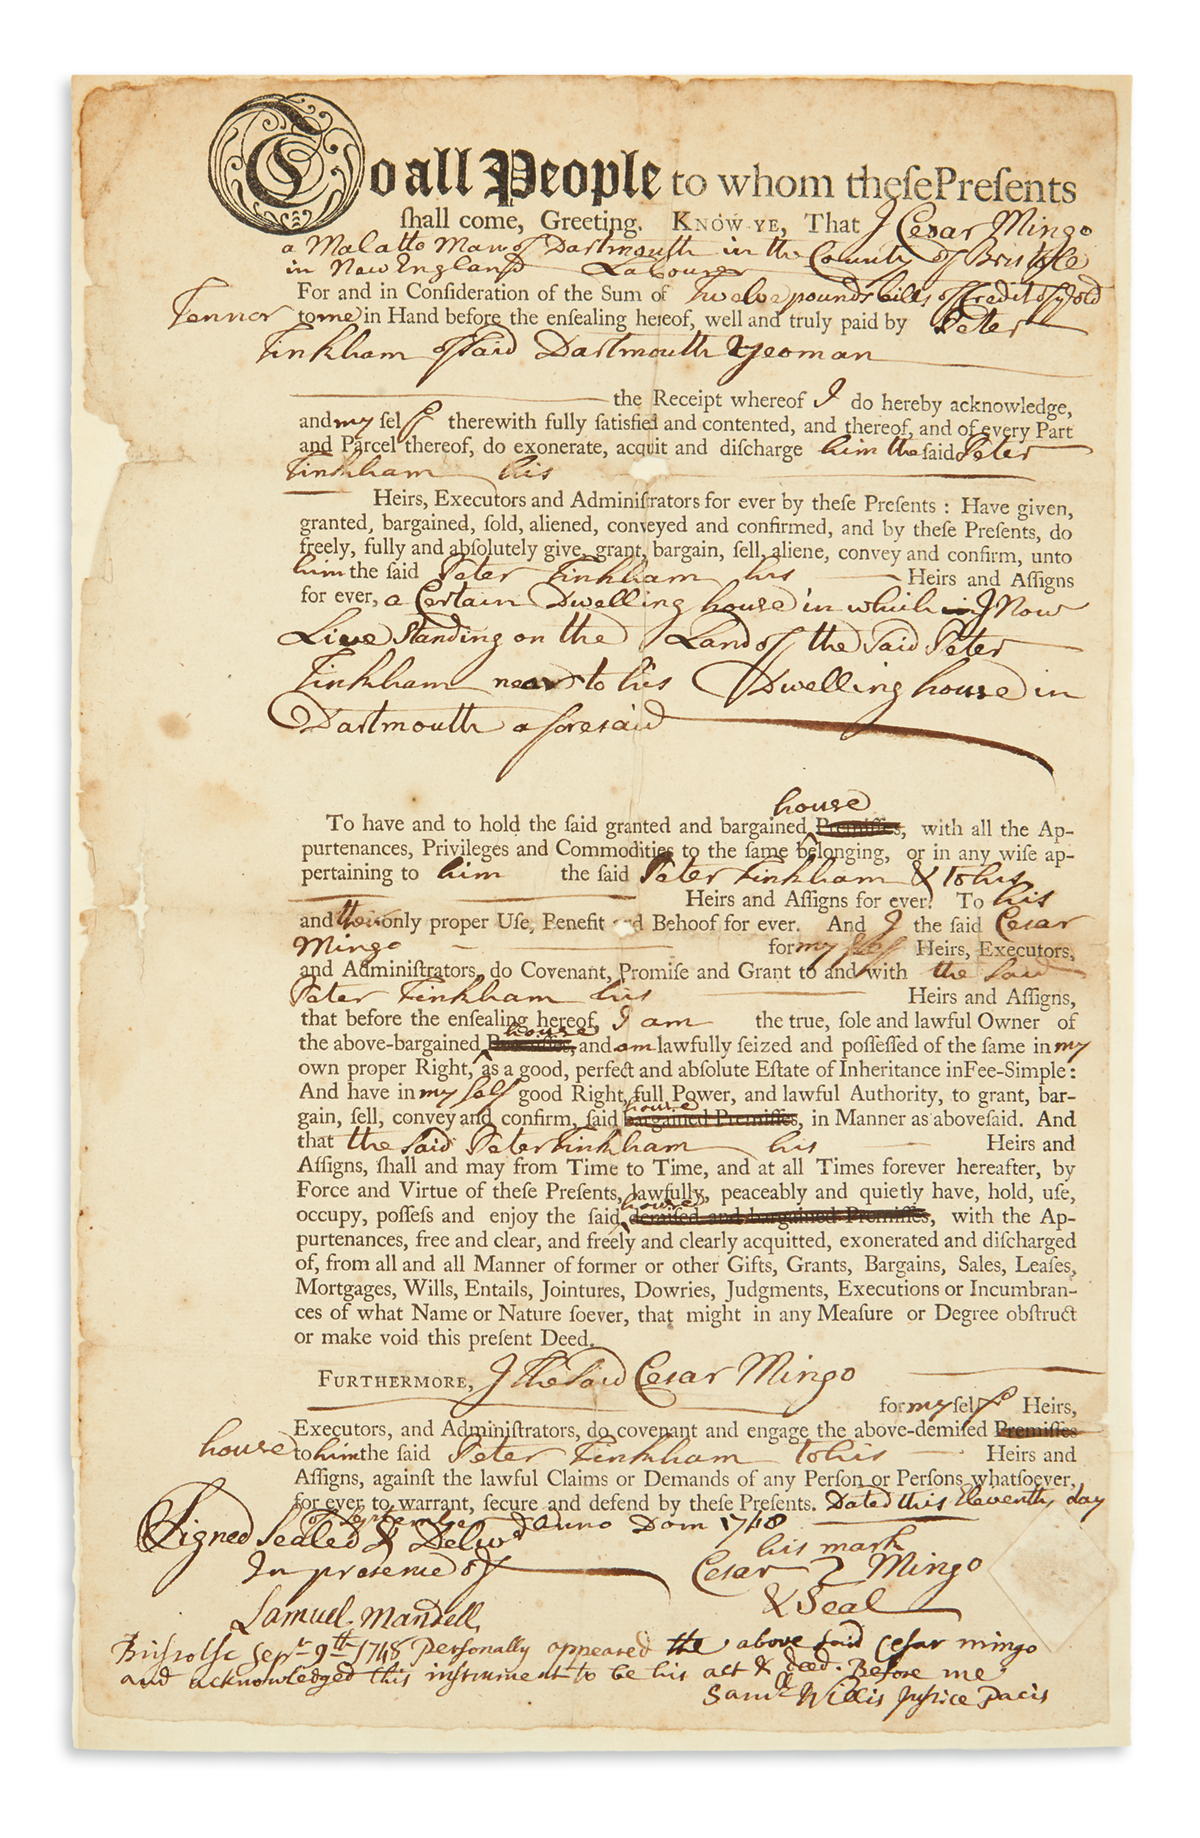 (SLAVERY AND ABOLITION.) Mingo, Cesar. Deed of a house by a Massachusetts malatto man.